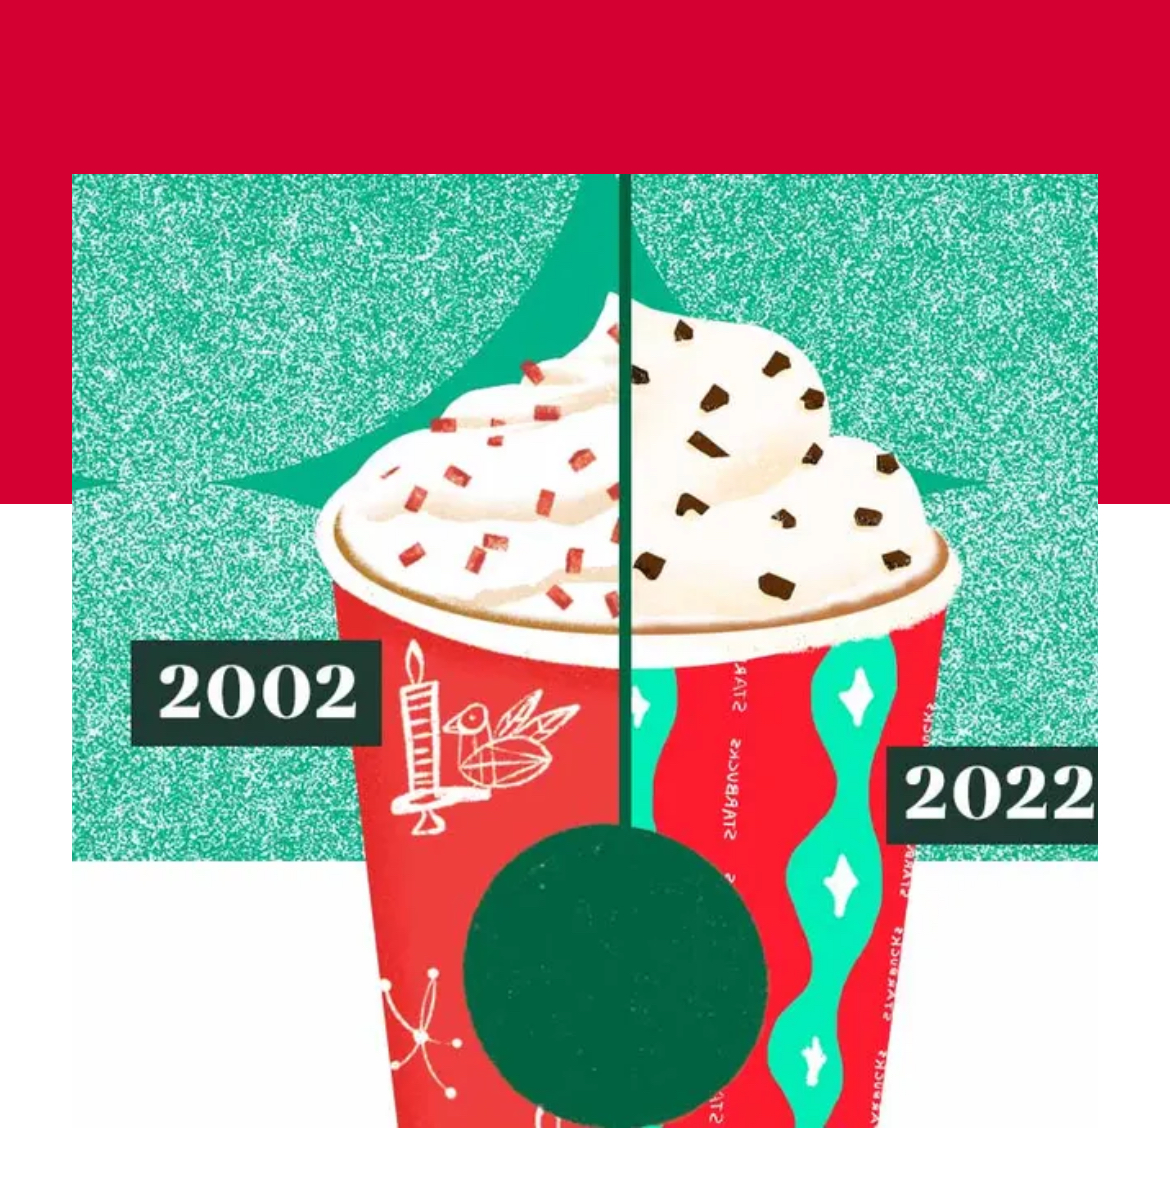 20+years+of+the+Peppermint+mocha.%0AIt+tasted+really+good+and+got+me+in+the+Christmas+spirit-Josh+Hill.